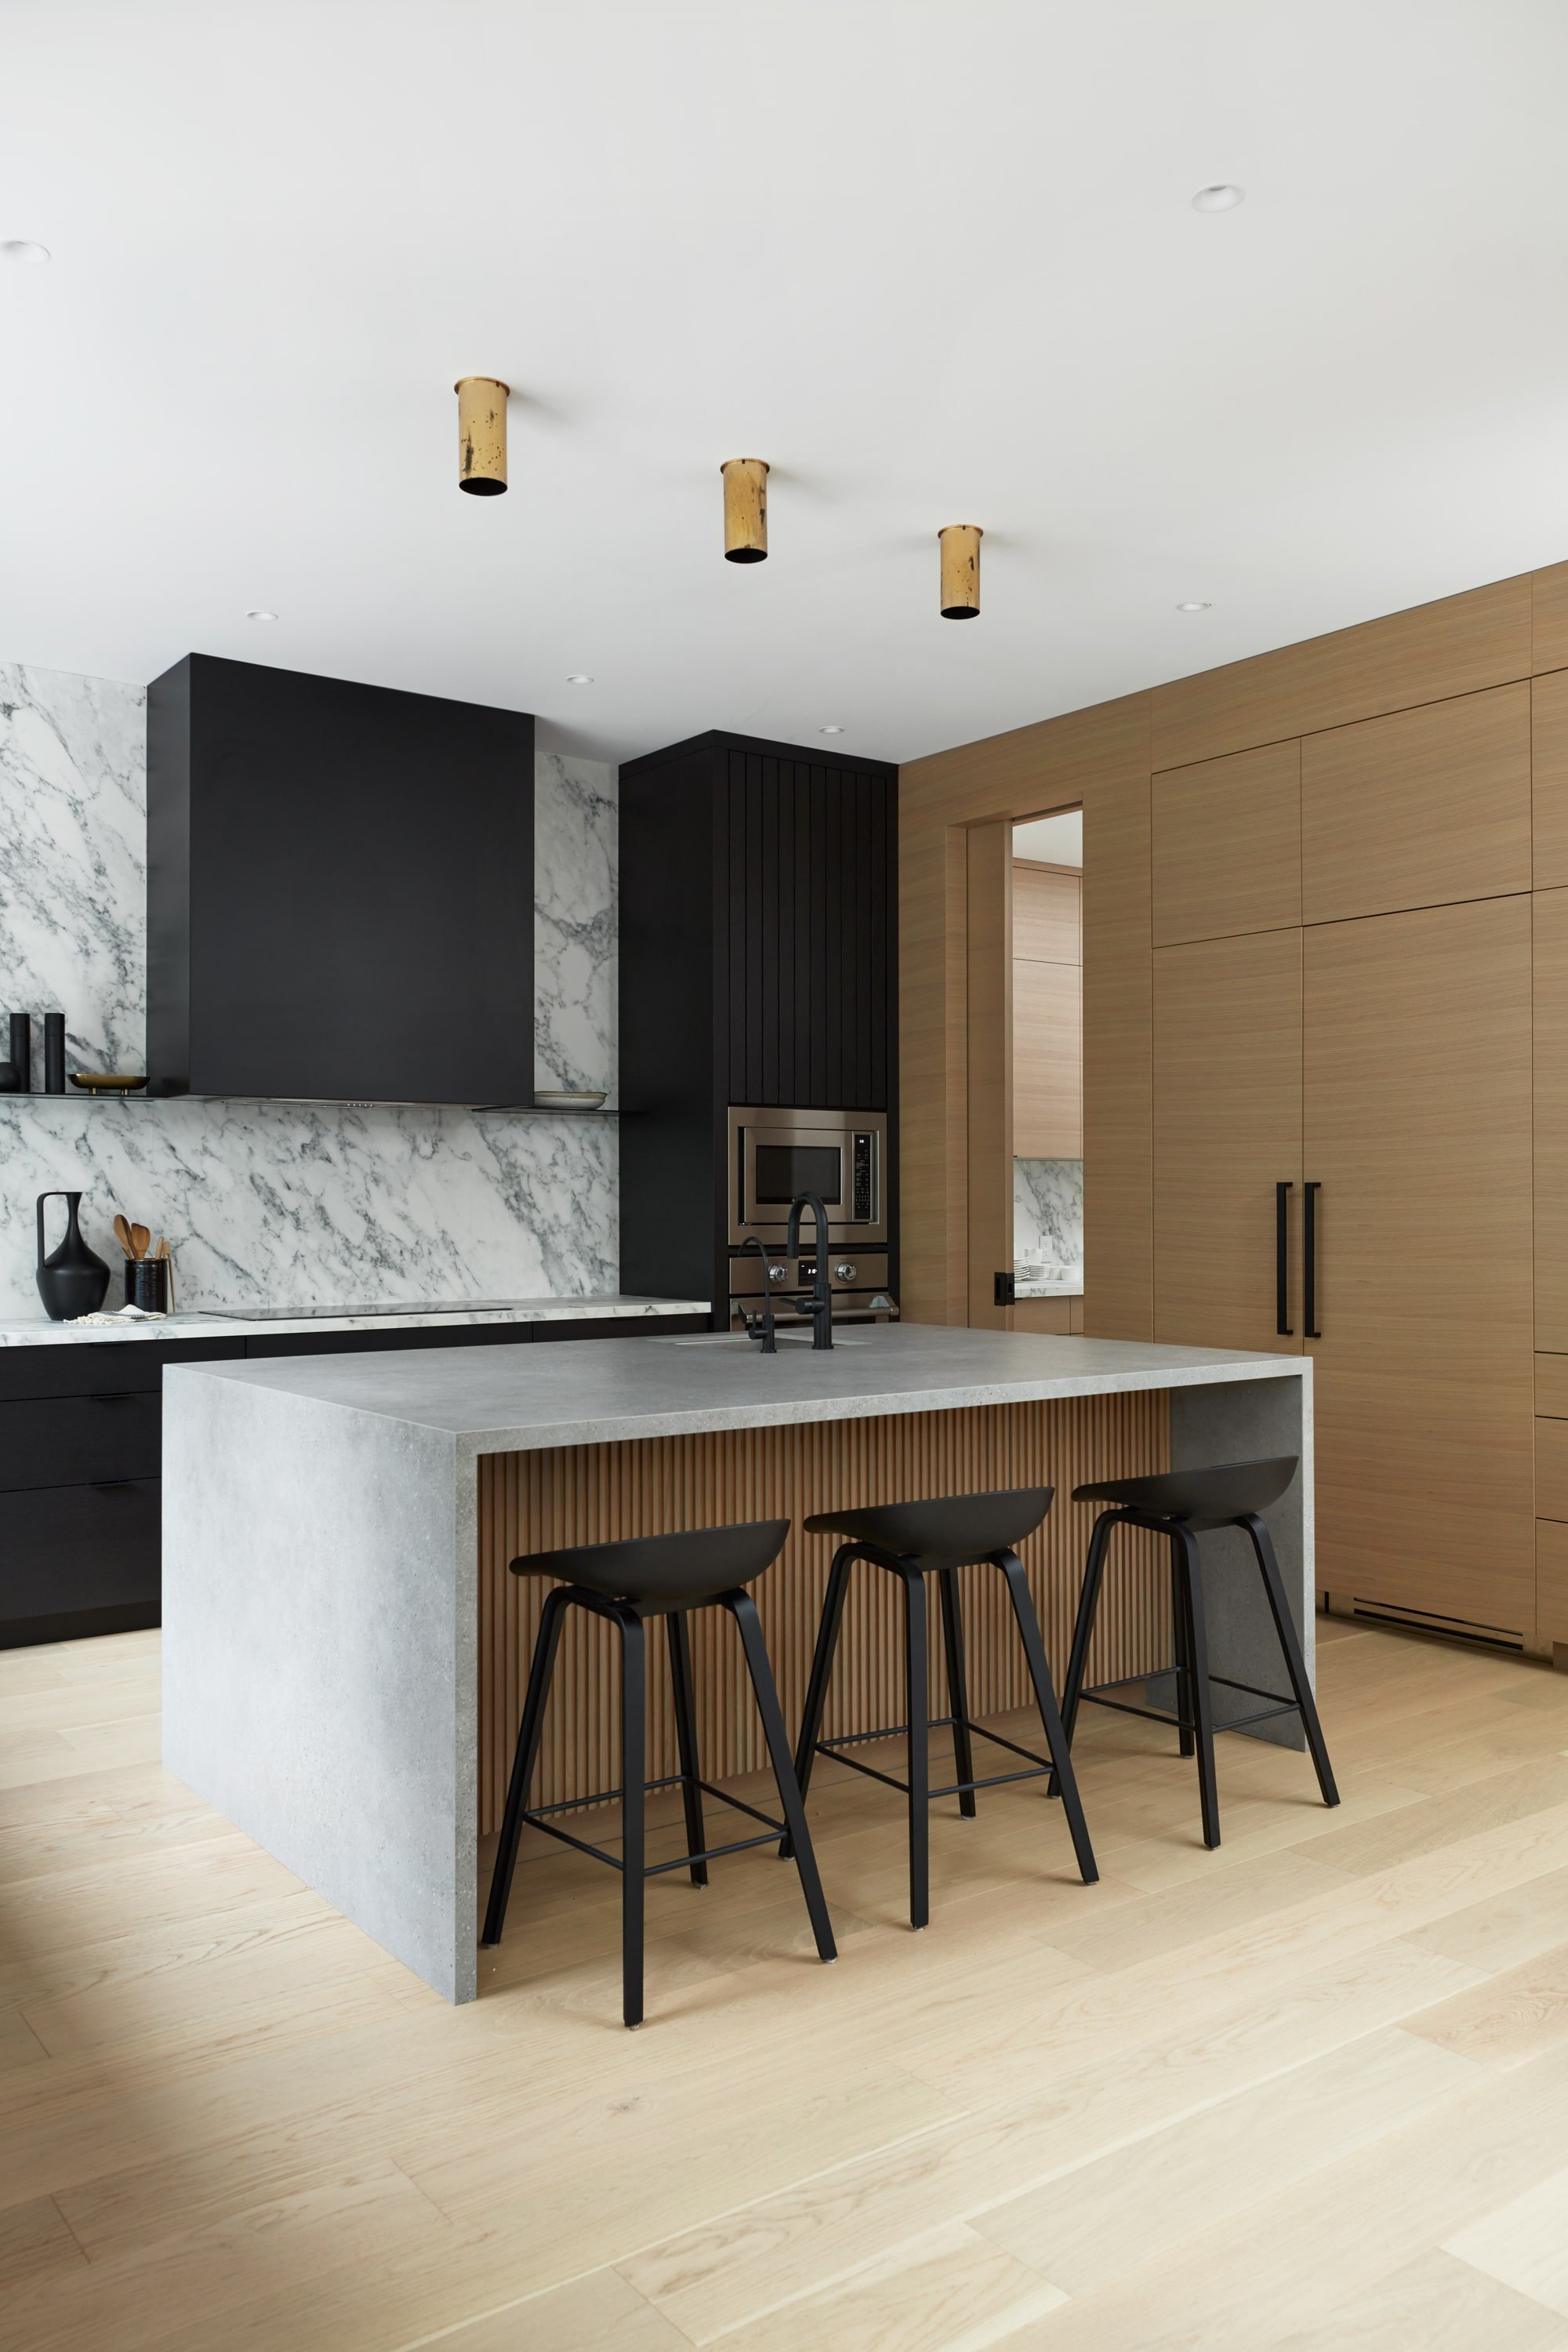 modern minimal kitchen with hidden sub zero fridge and neutral palettes with touches of black